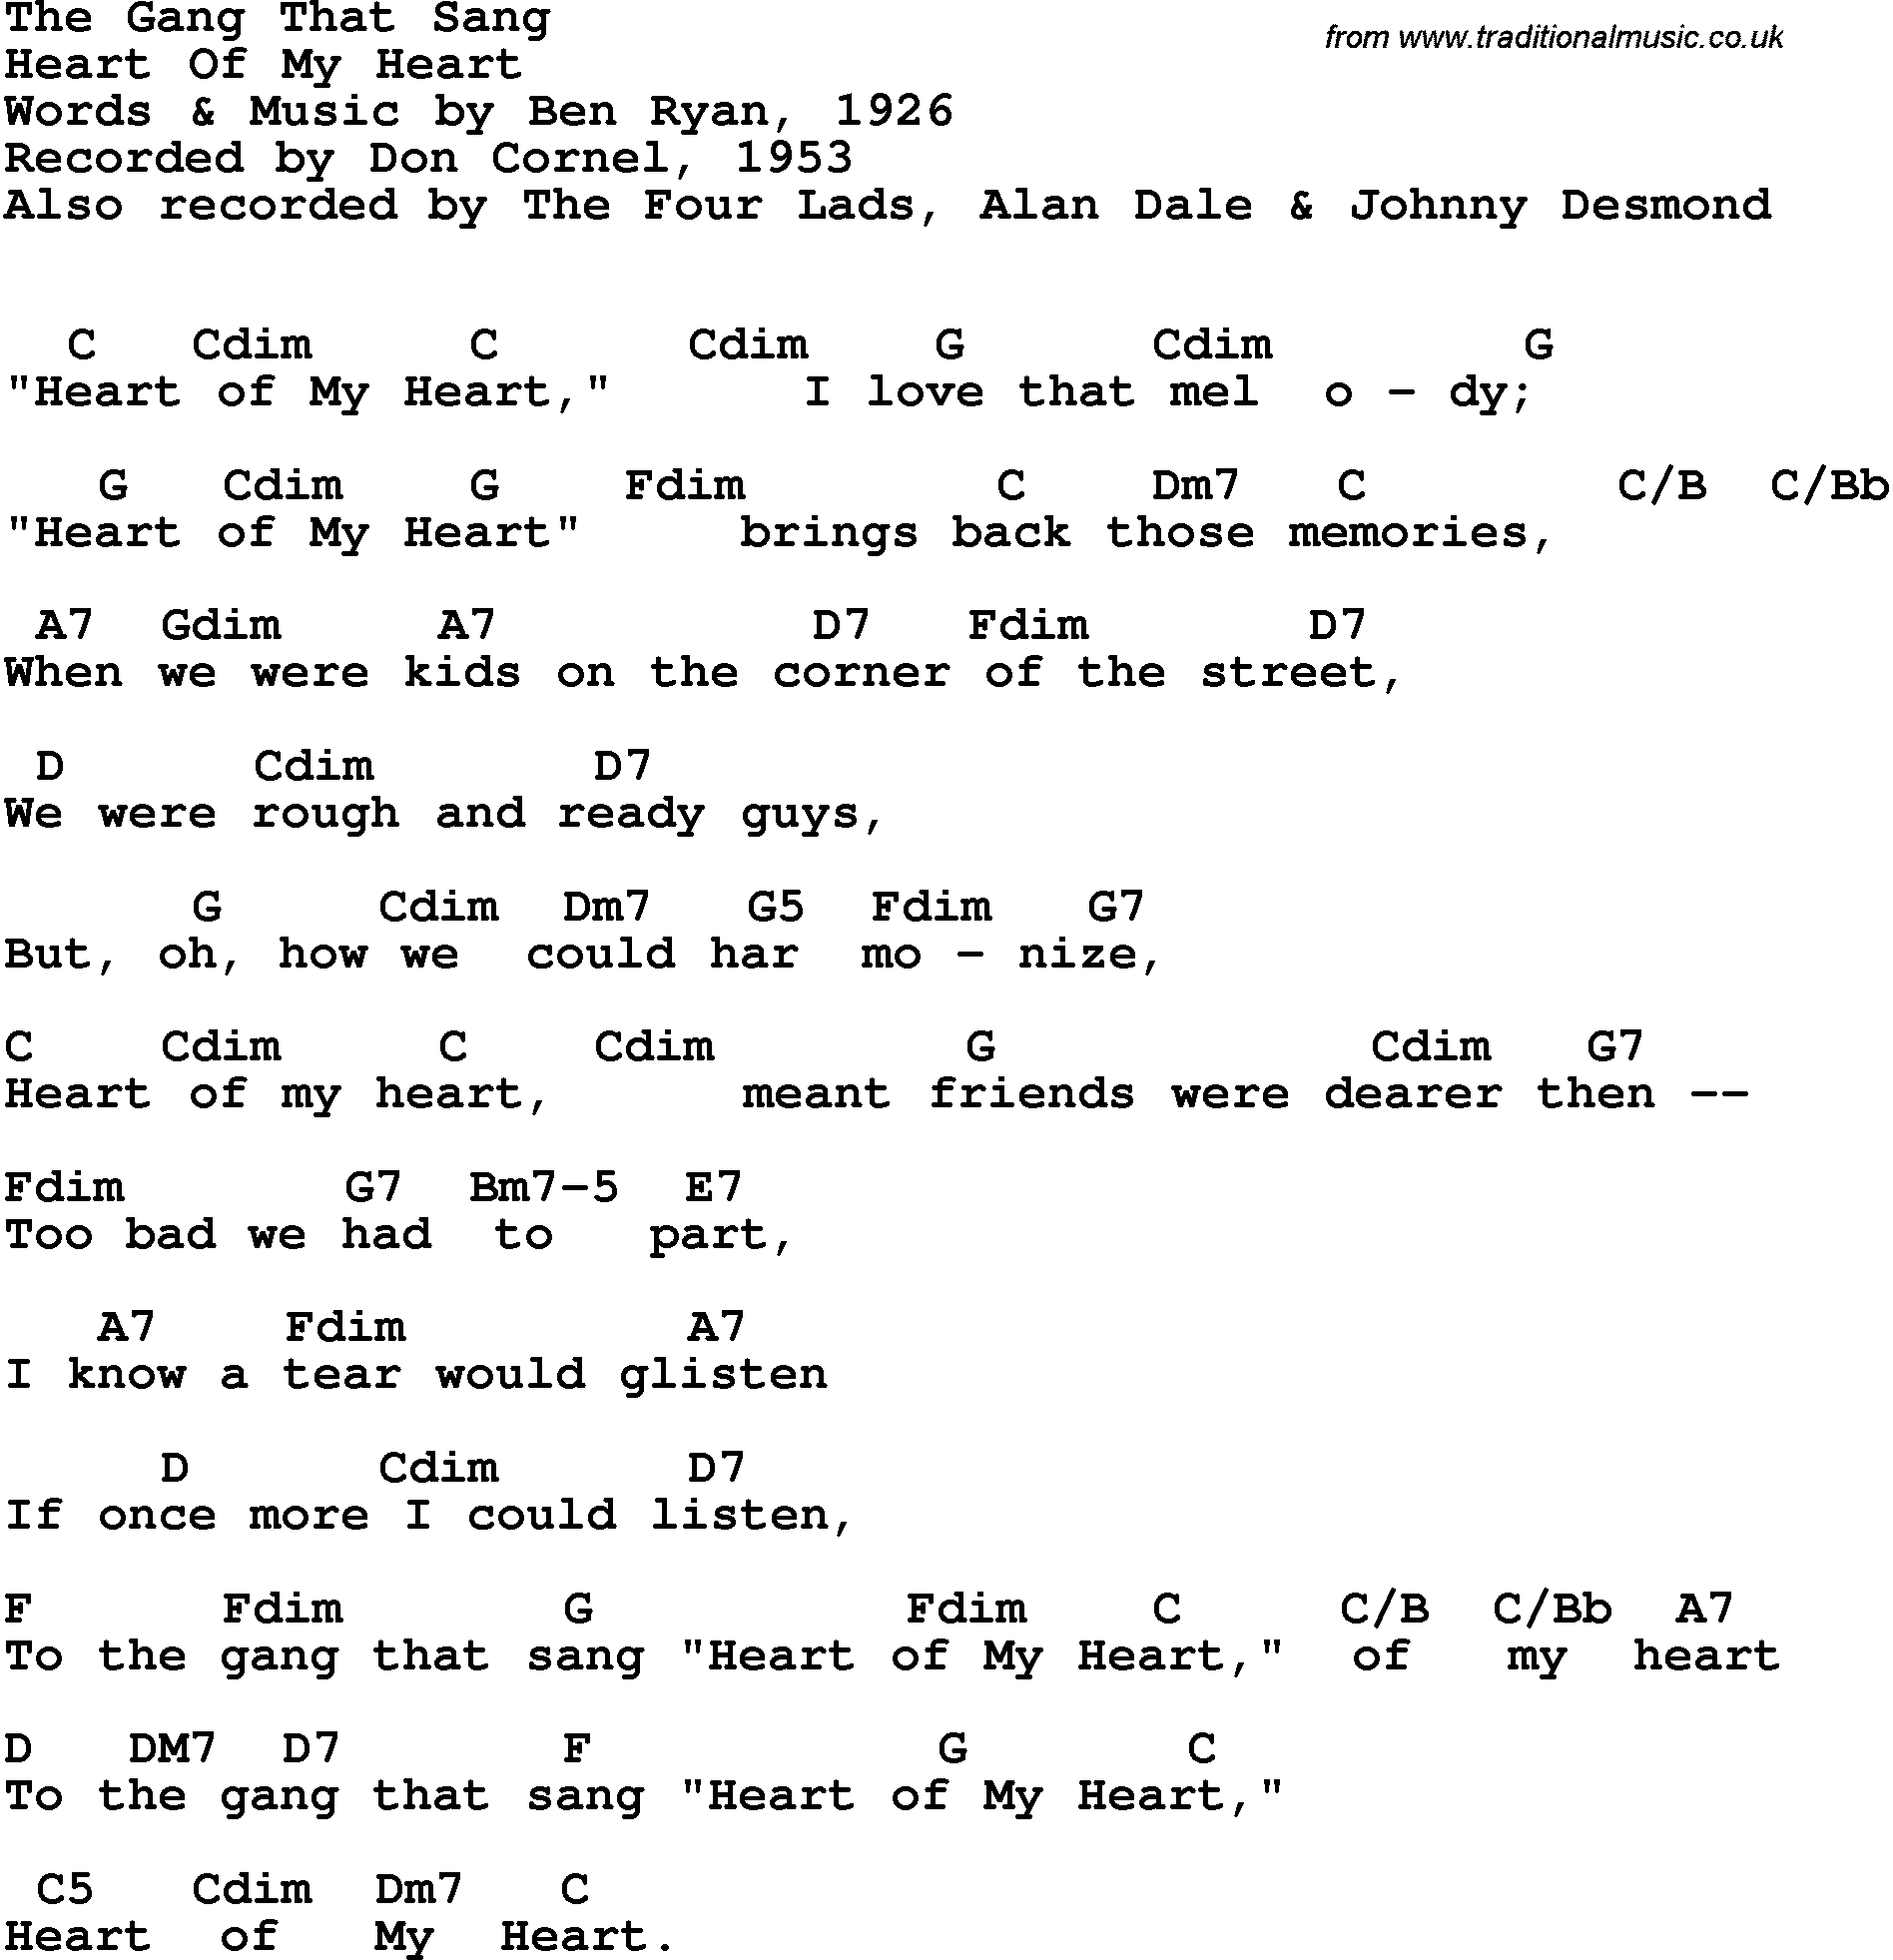 Song Lyrics with guitar chords for Gang That Sang Heart Of My Heart, The - Don Cornell, 1953